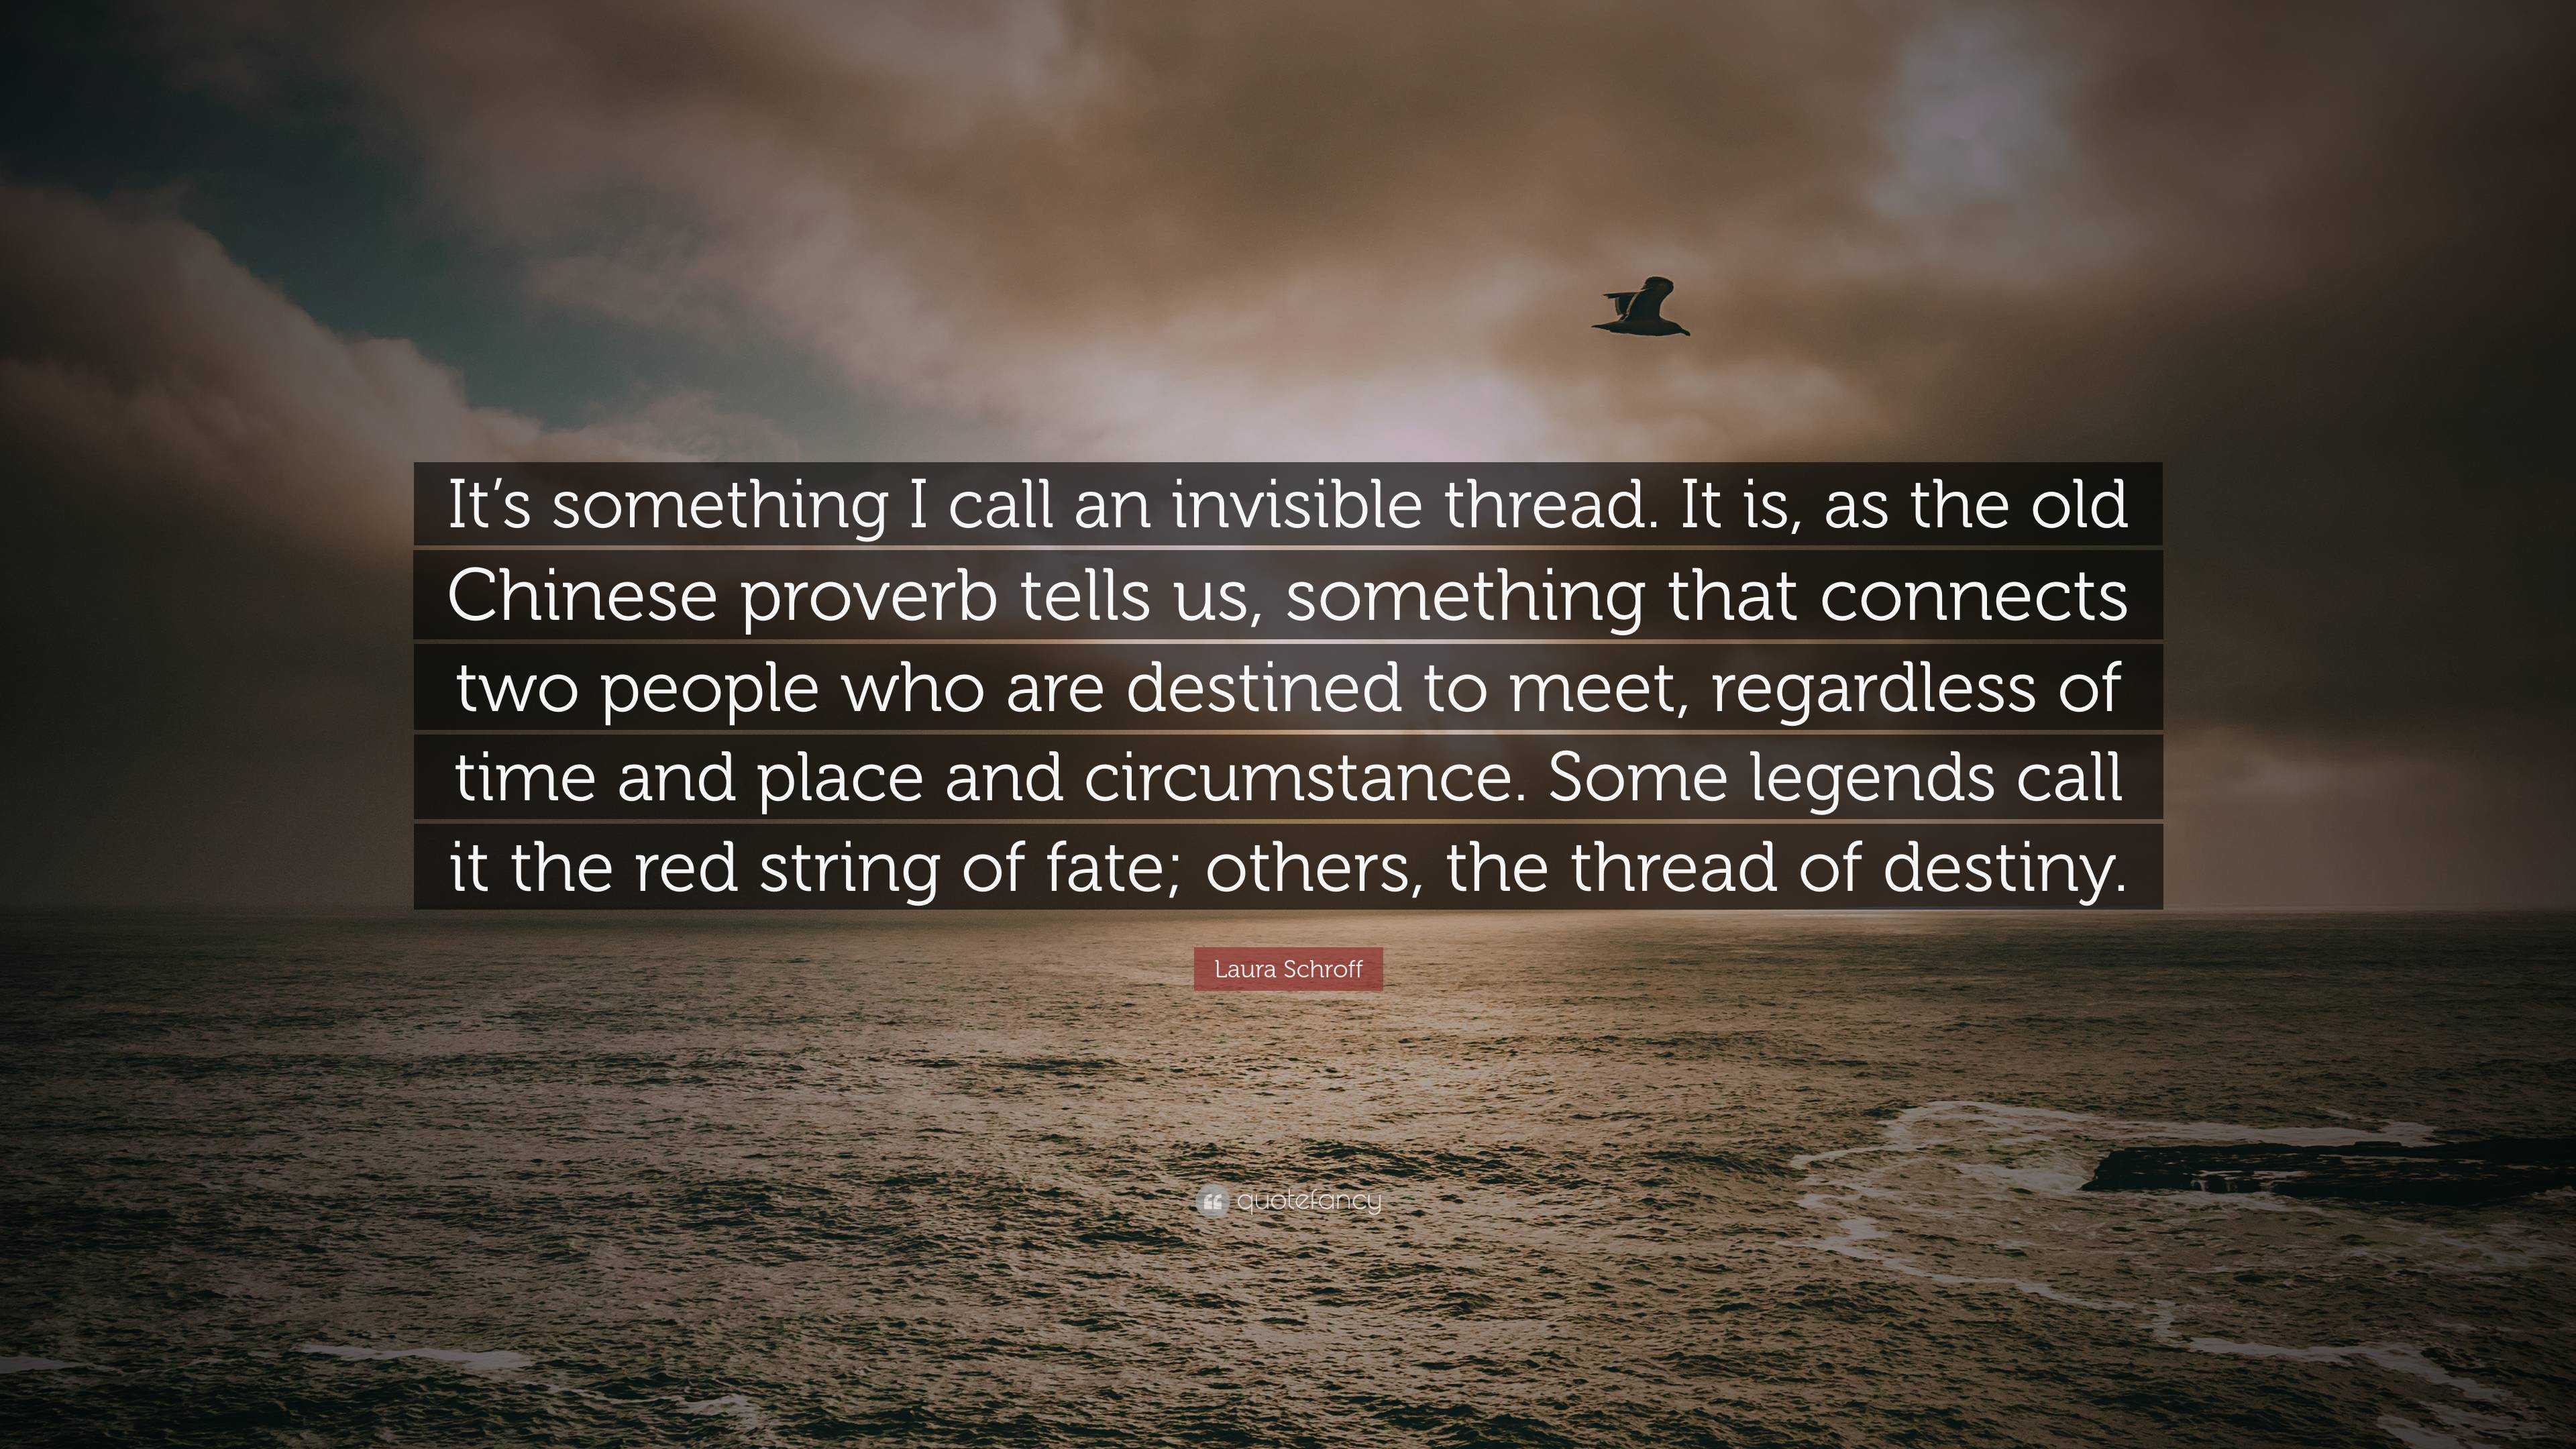 Laura Schroff Quote: “It's something I call an invisible thread